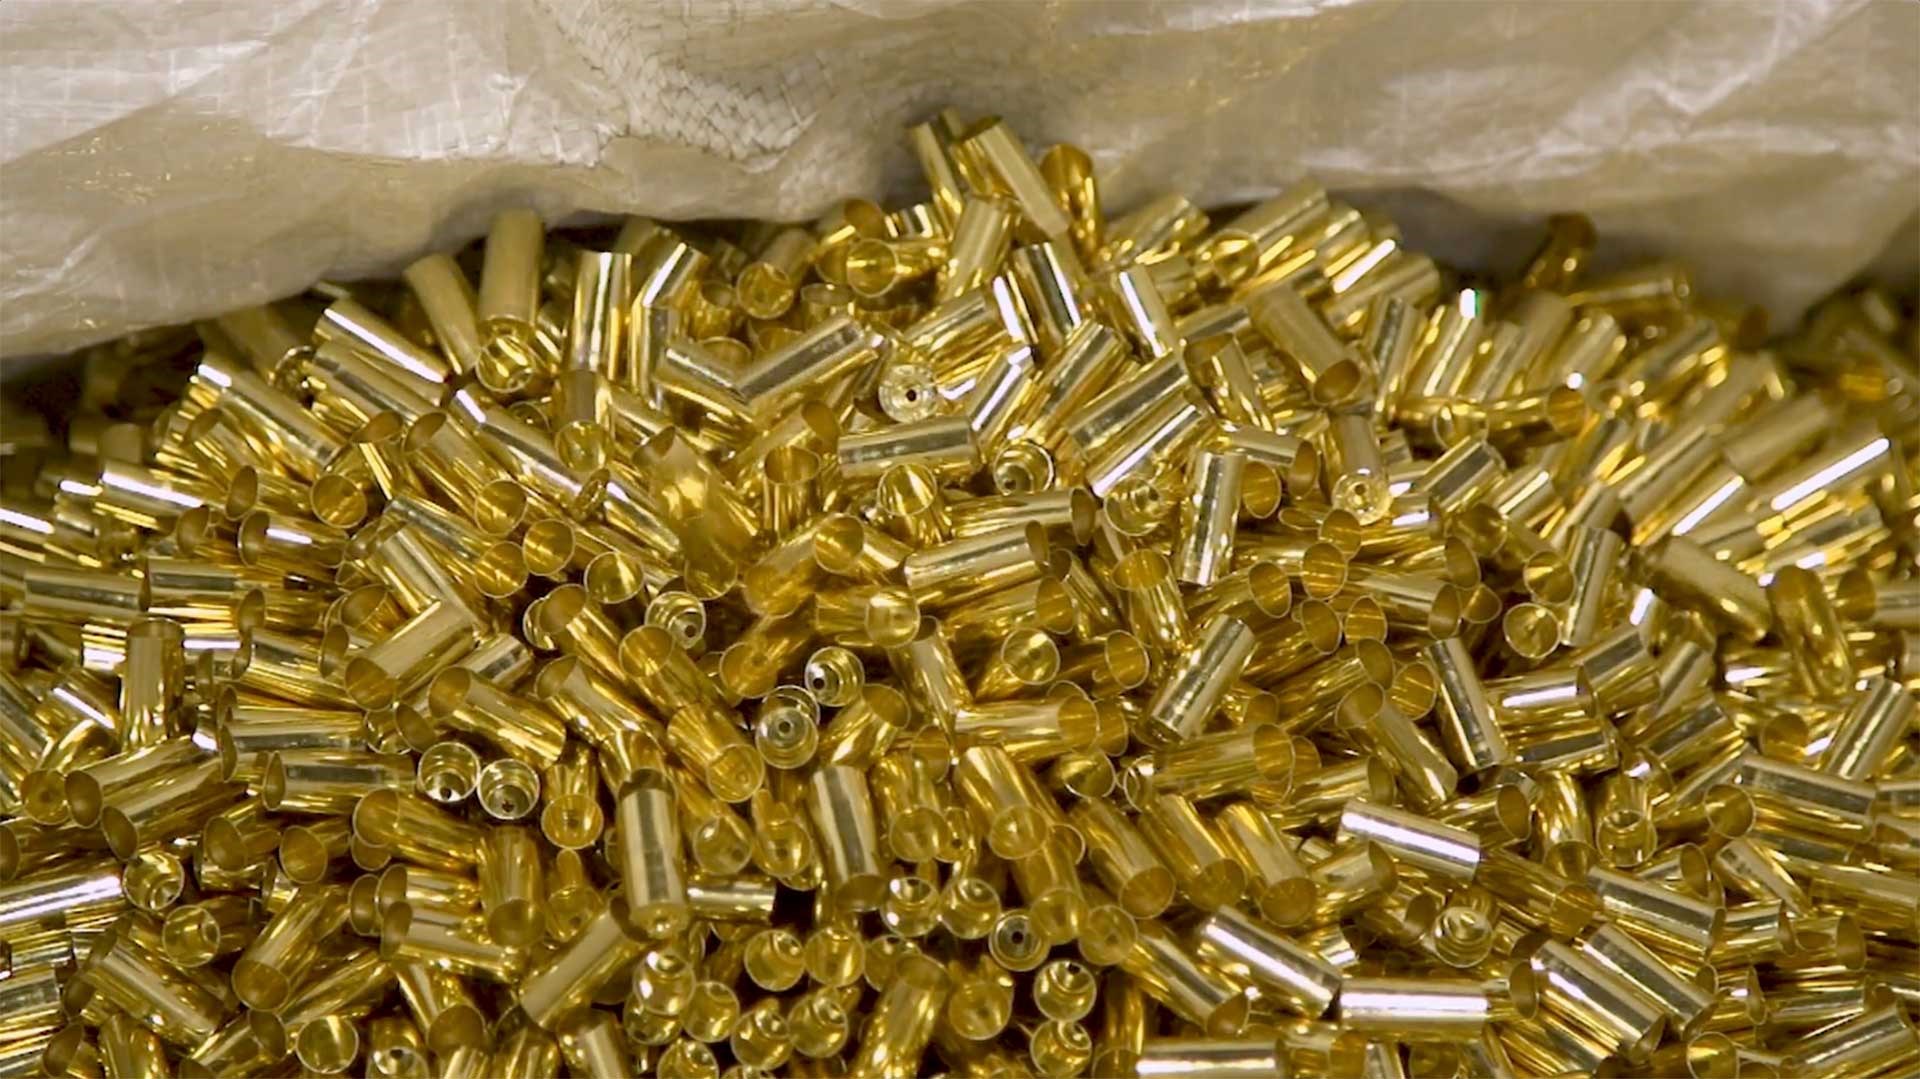 Empty brass cartridge cases in a pile, waiting to be loaded.